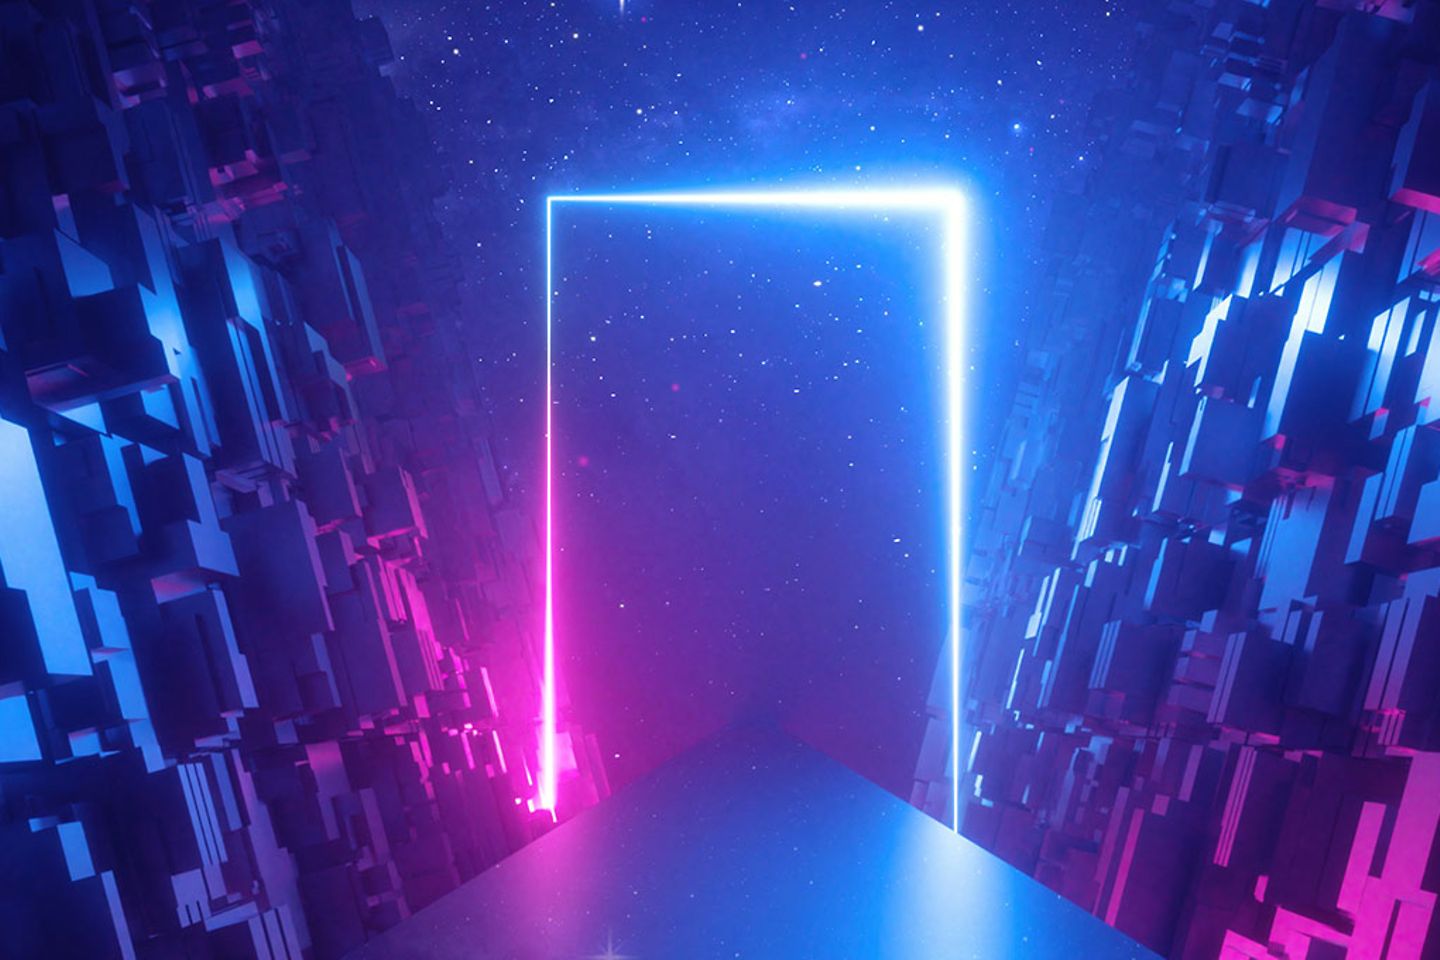 Neon frame in abstract room under starry sky